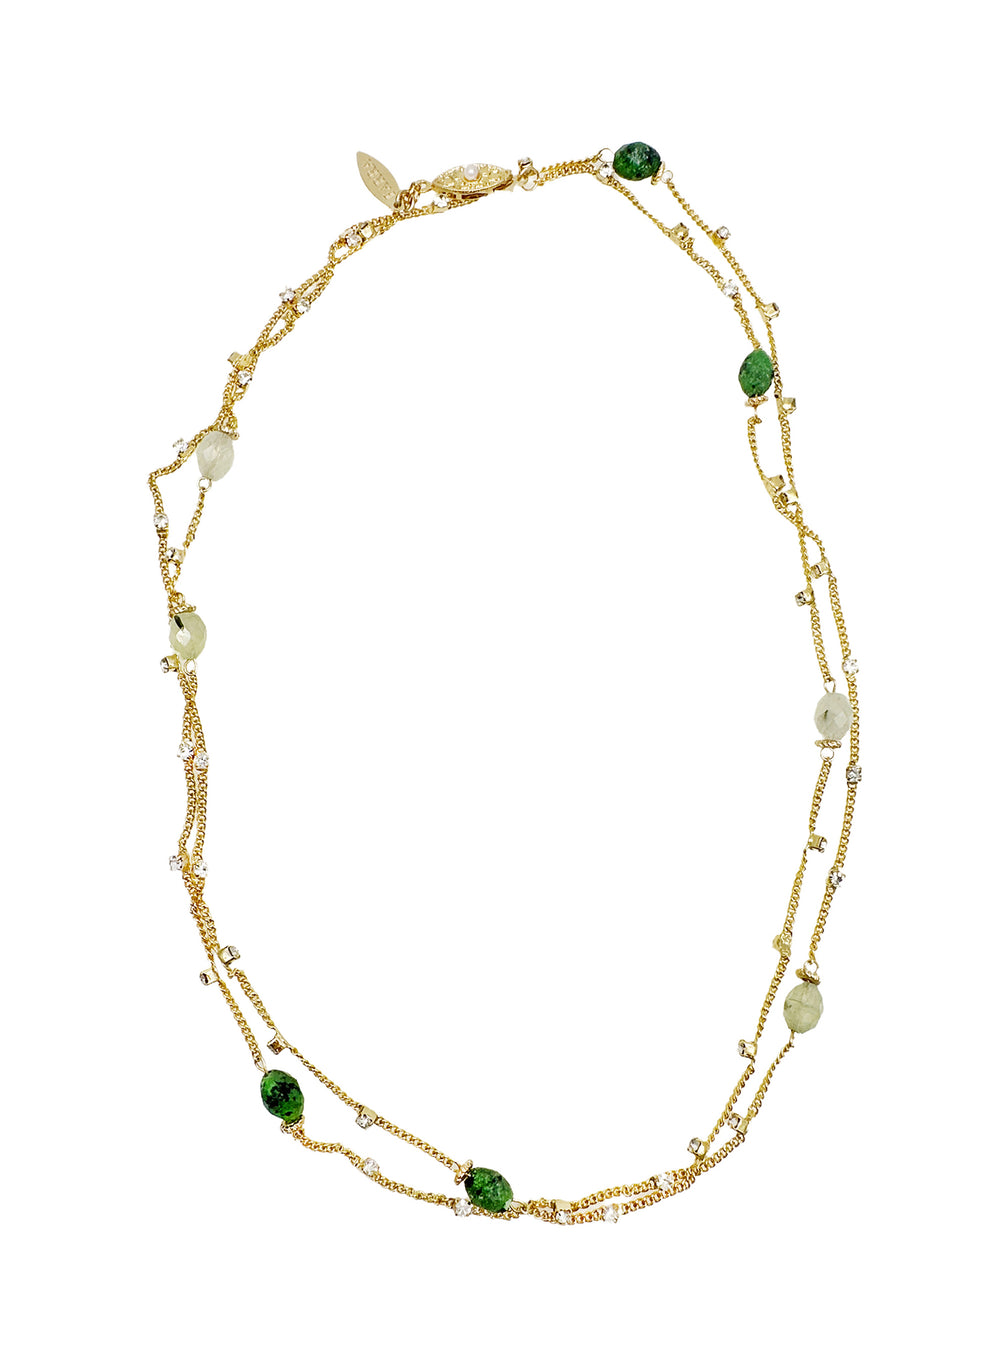 Zircon Stone With Green Gemstone Long Gold Necklace LN050 - FARRA